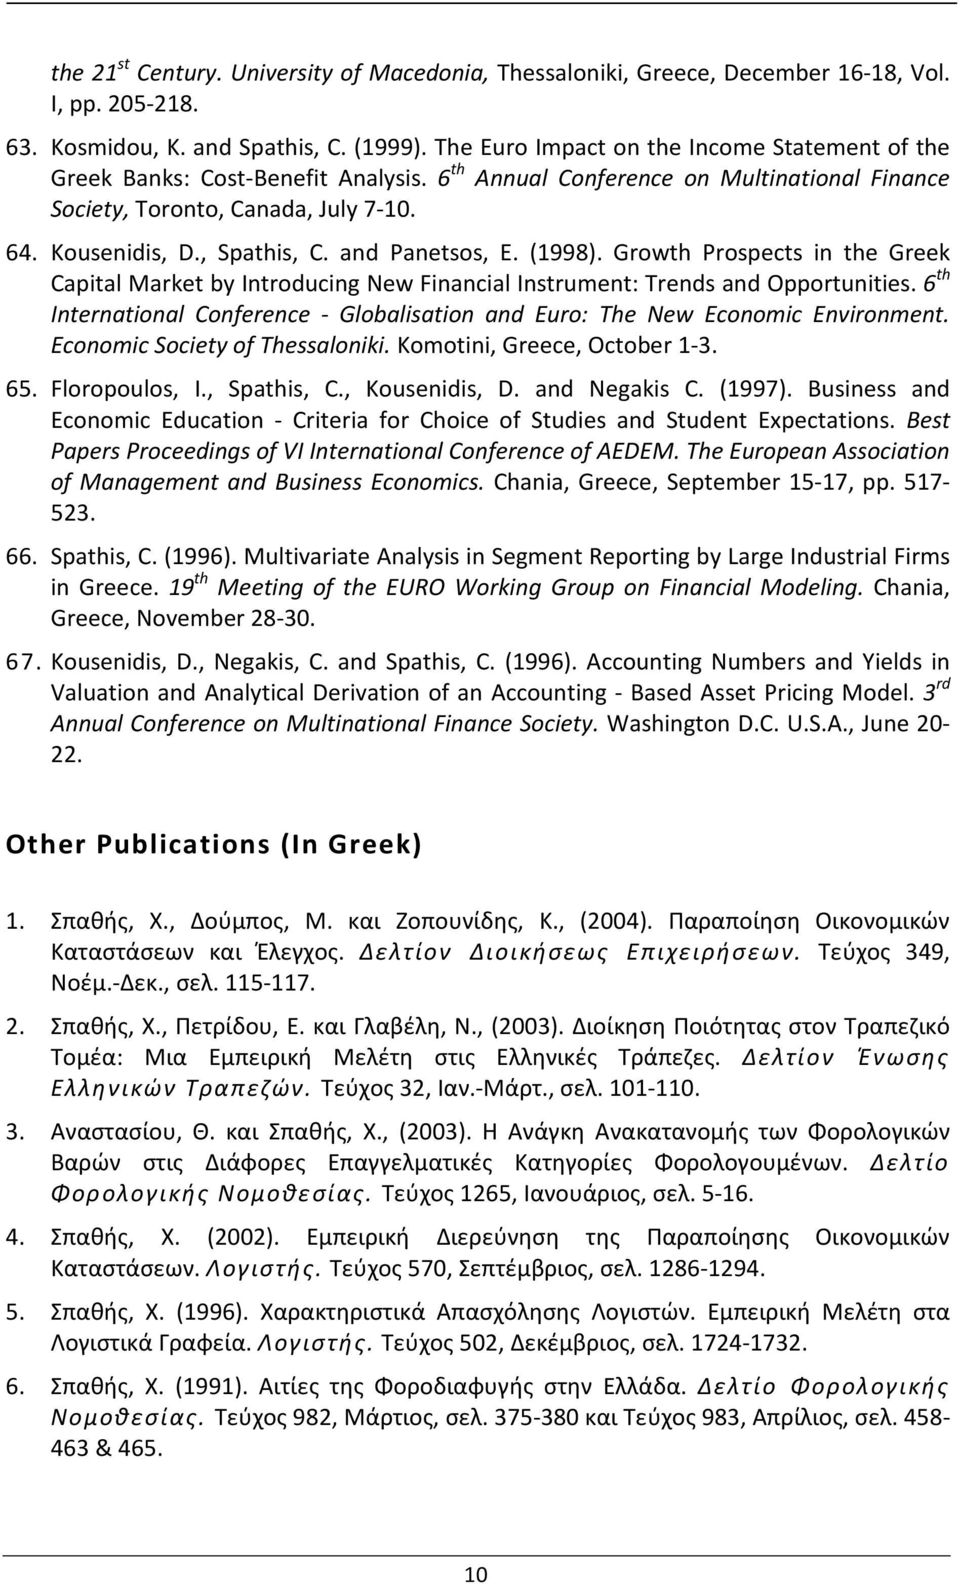 and Panetsos, E. (1998). Growth Prospects in the Greek Capital Market by Introducing New Financial Instrument: Trends and Opportunities.